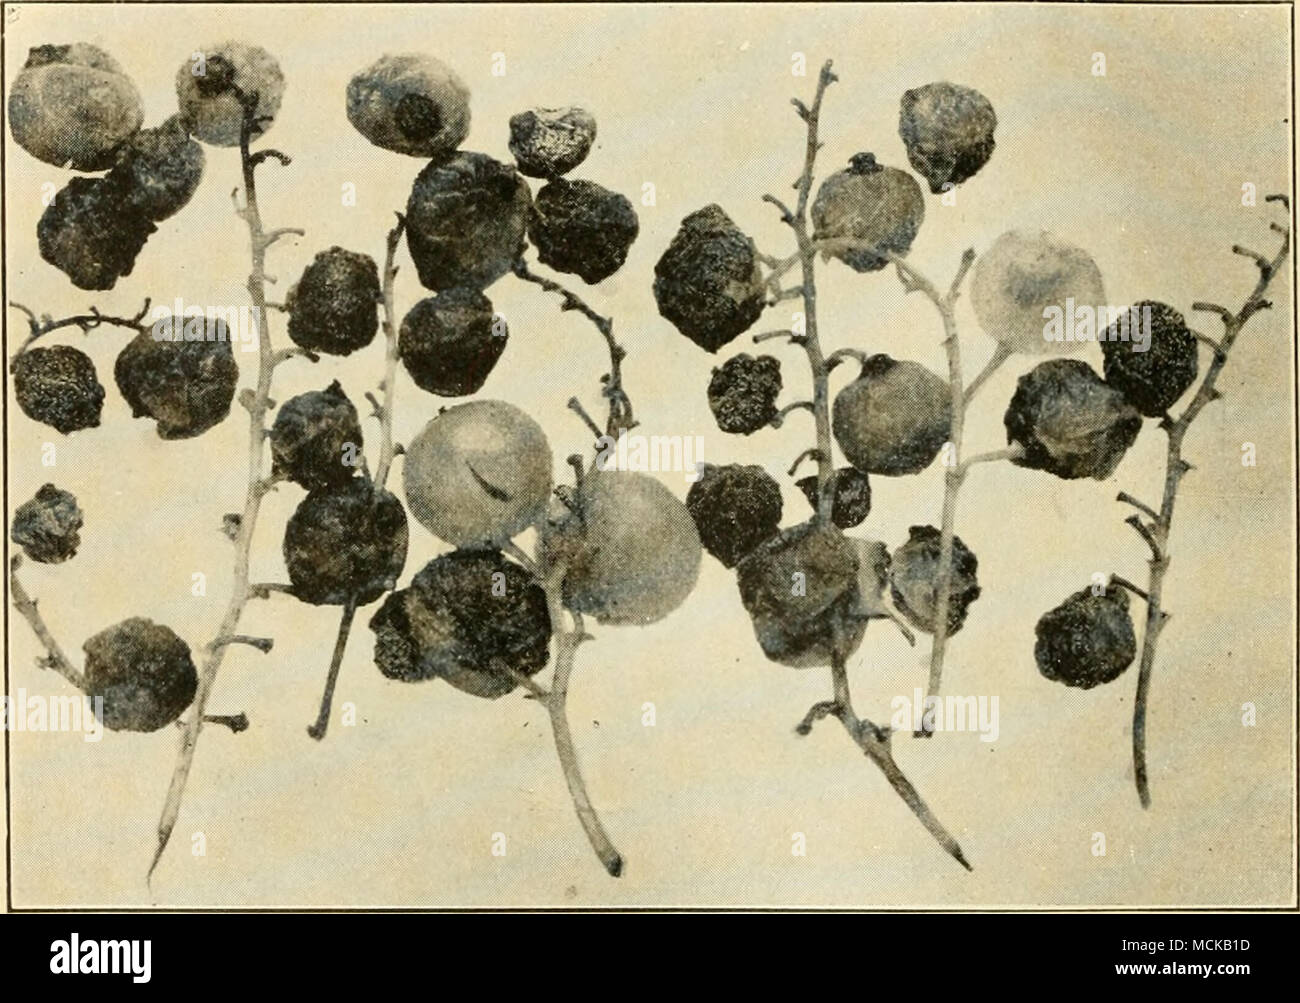 . Fig. 58. — Anthracnose of white currants. After Clinton. Experiment Station: &quot;Spray thoroughly with Bordeaux mixture, commencing before the leaves appear. Make the second treatment as the leaves are unfolding and thereafter at intervals of ten to fourteen days until the fruit is two-thirds grown. In wet seasons make one or two applications after the fruit is gathered. When worms appear, add Paris green or green arsenoid to the Bordeaux.&quot; European rust {Cronartium ribicola F, v. Wal.). — Orange- Stock Photo